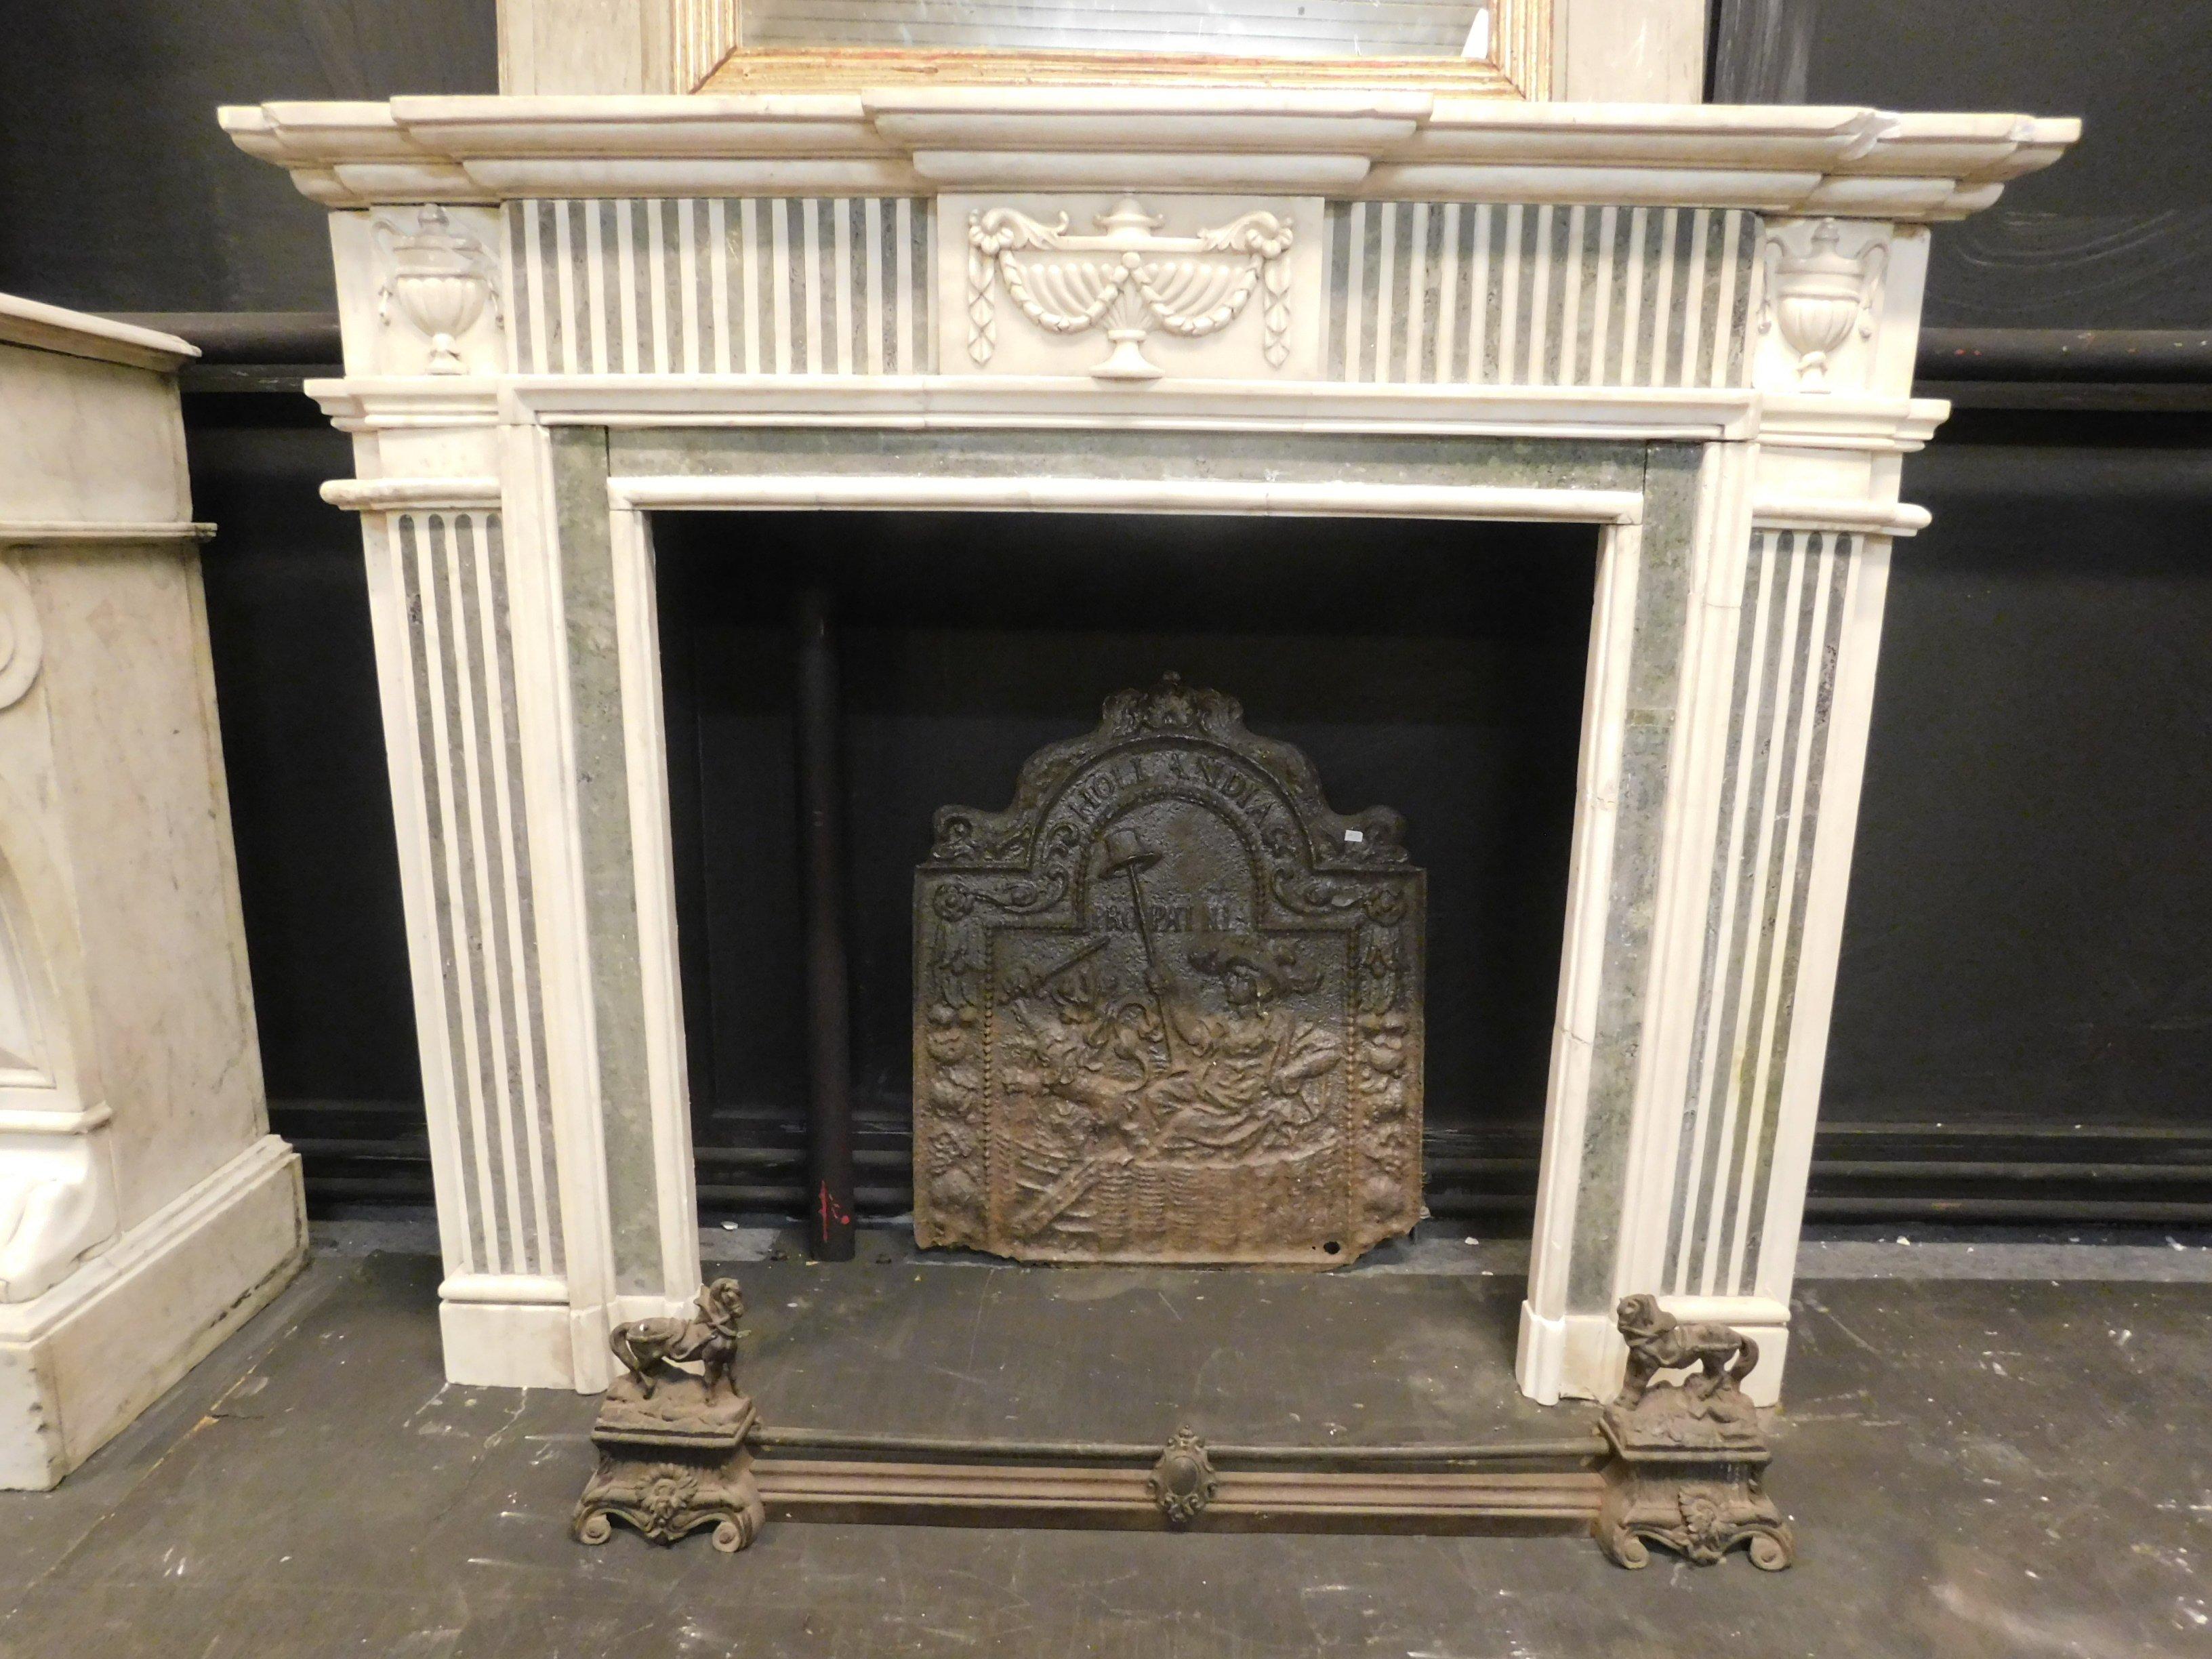 Antique mantel fireplace in white Carrara marble inlaid with Verde Alpi marble, built in the early 19th century, for a noble palace in northern Italy (Genoa).
Elegant and refined, suitable for all environments, both for modern and classic, perfect